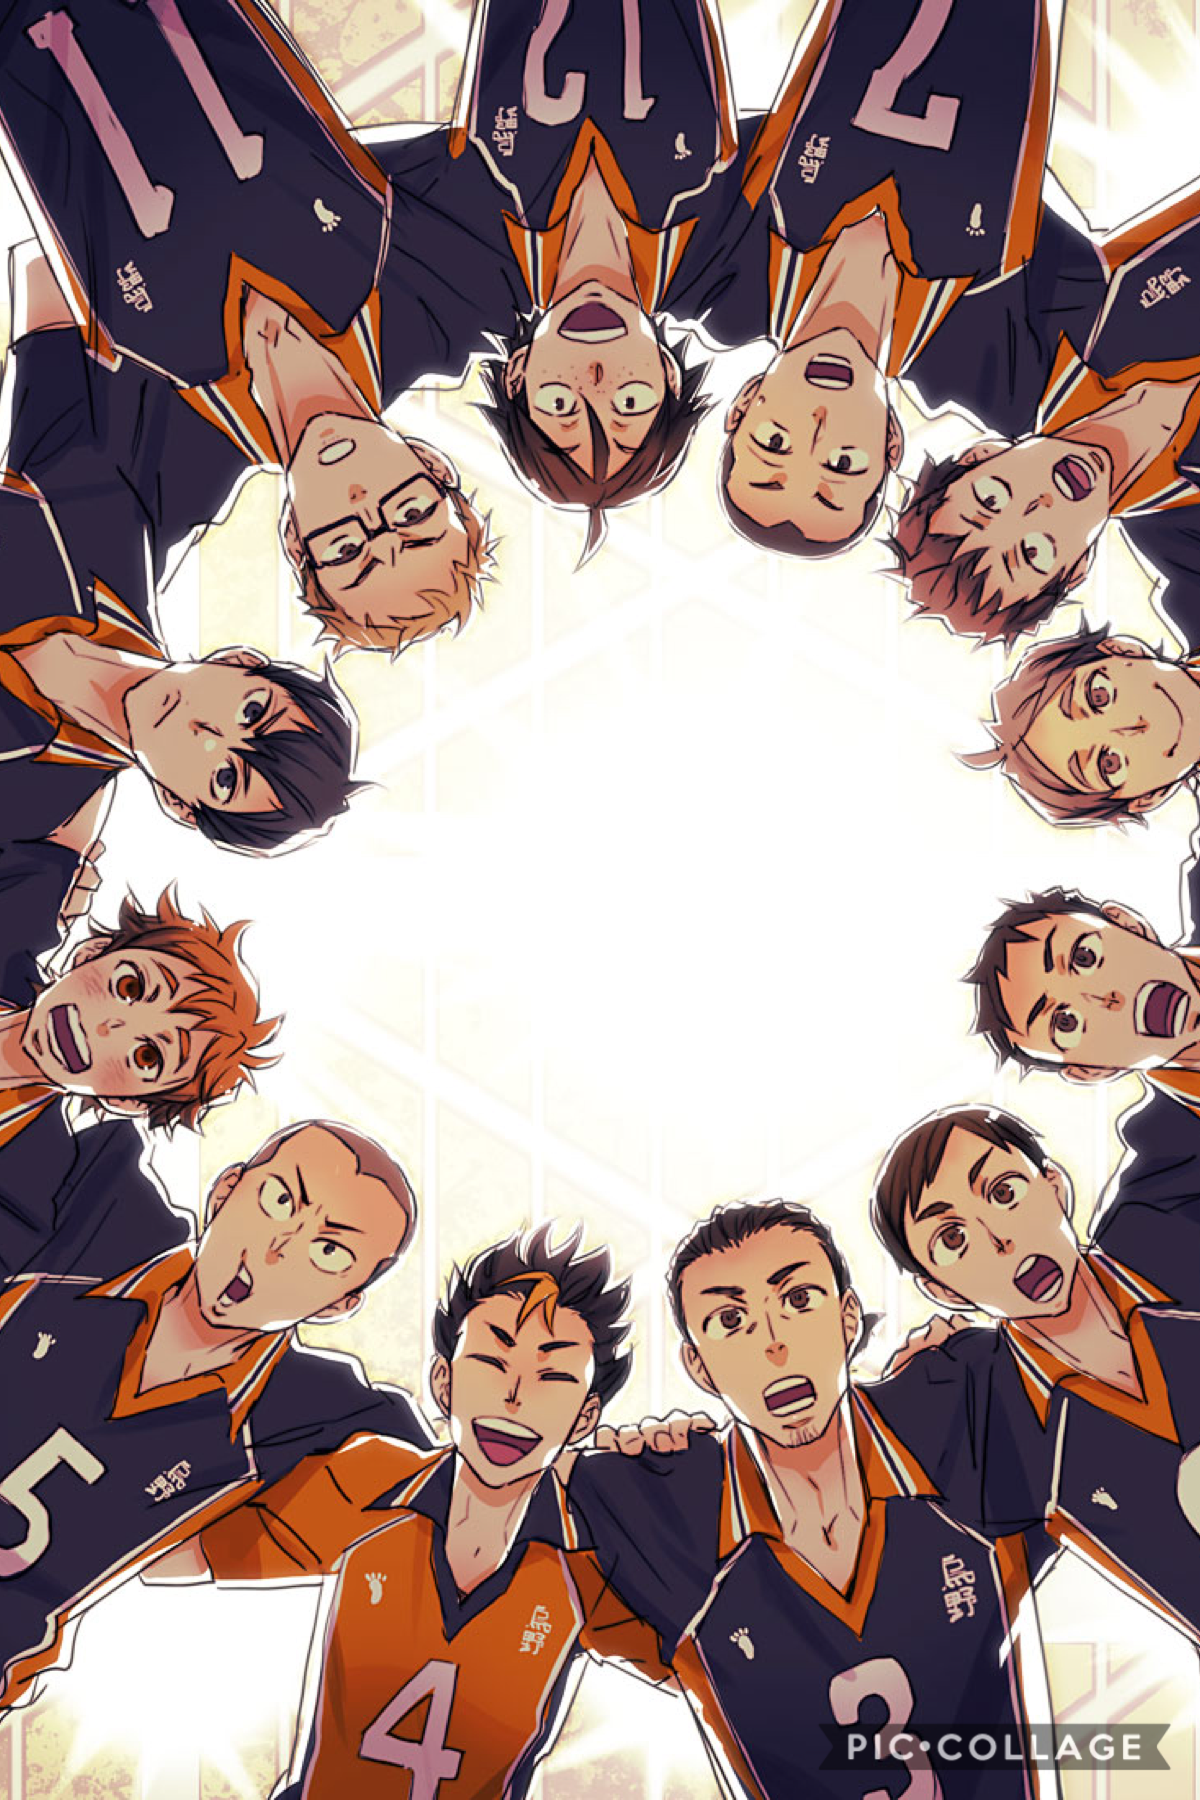 CAN’T WAIT FOR HAIKYUU S5!